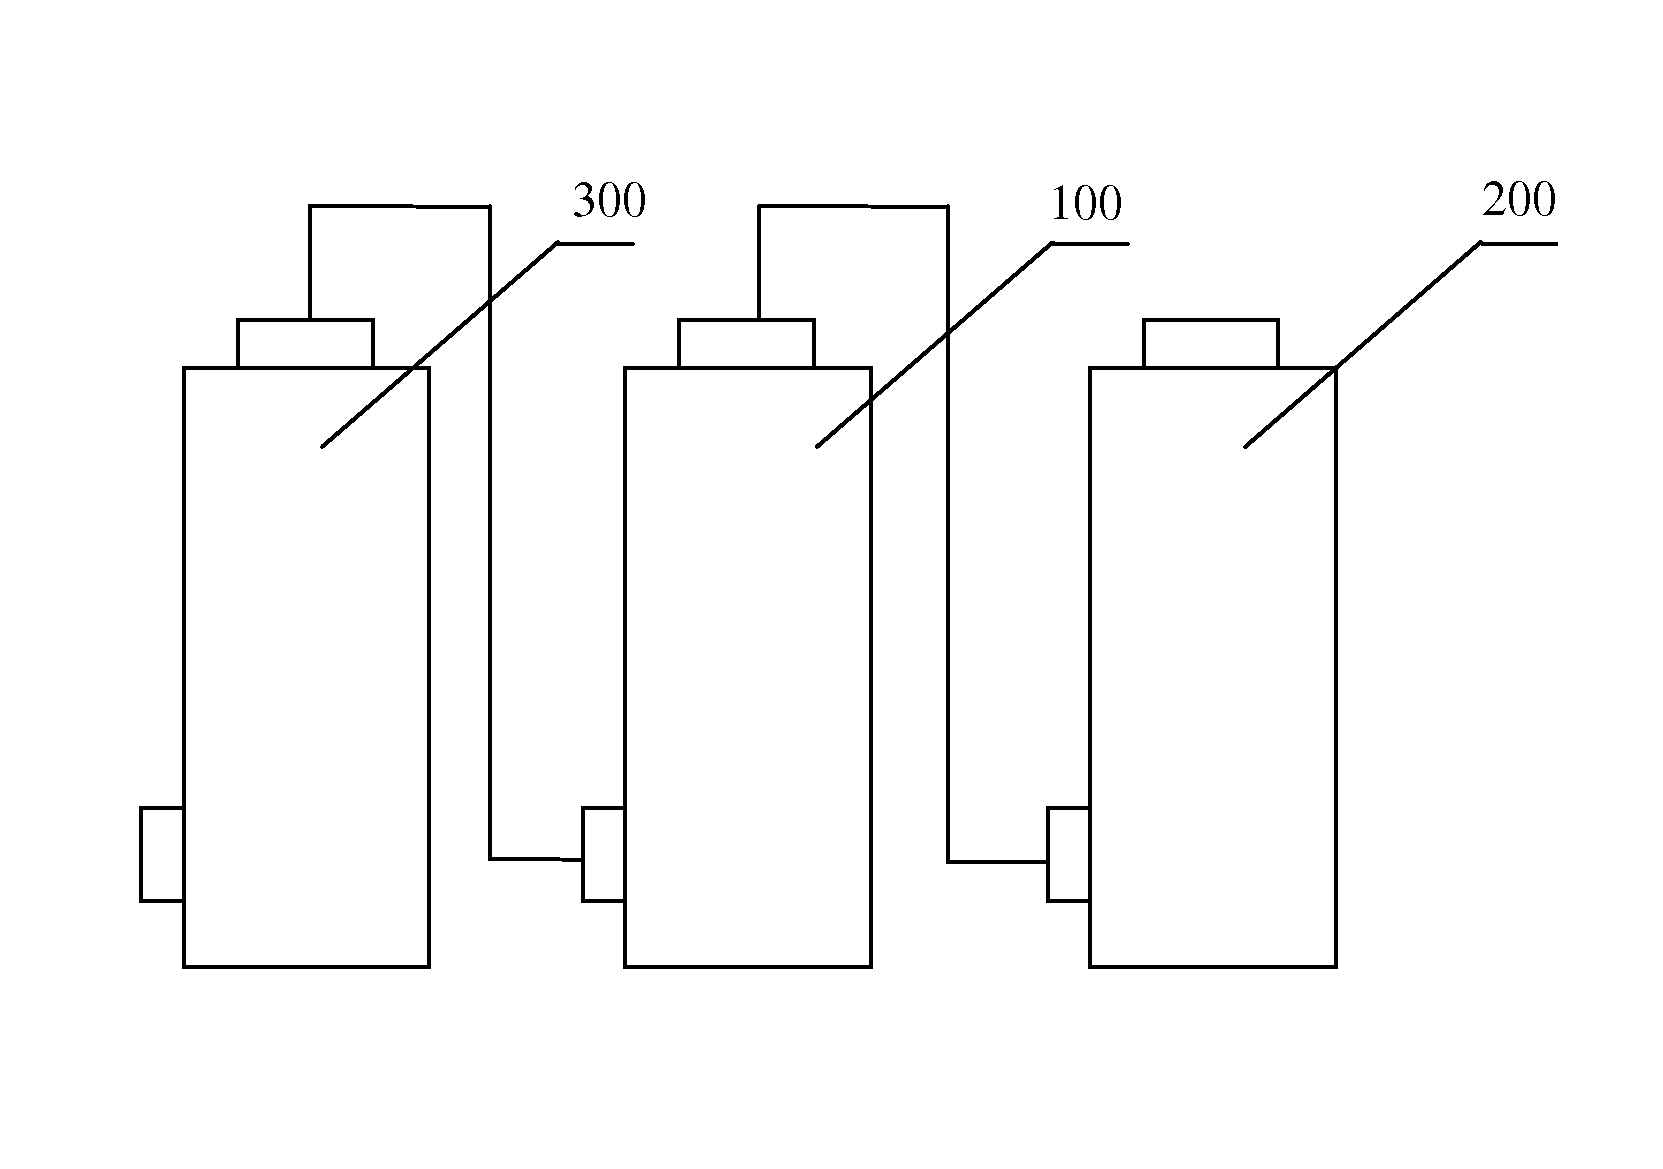 Purification device for flue gases